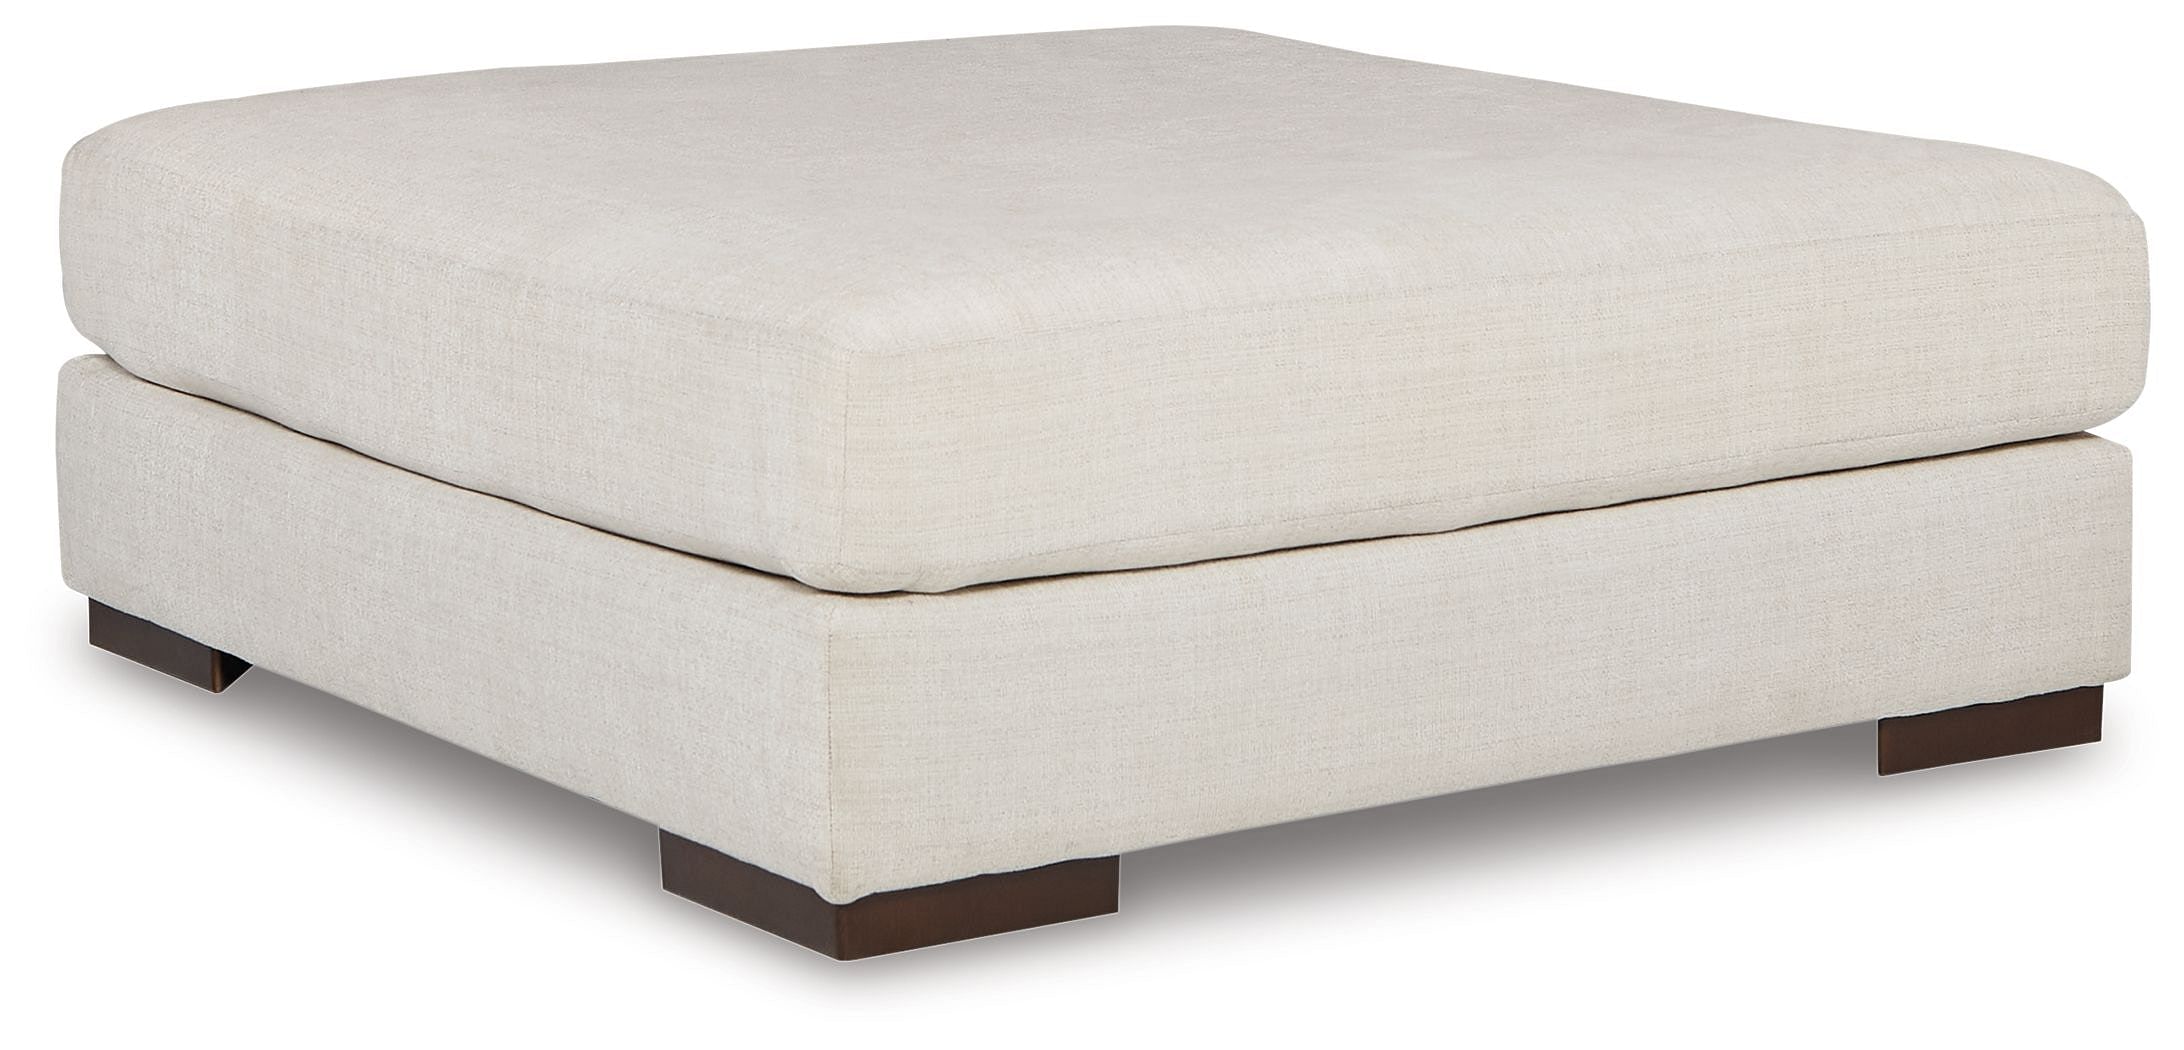 Ashley Living Room Oversized Accent Ottoman 102020...